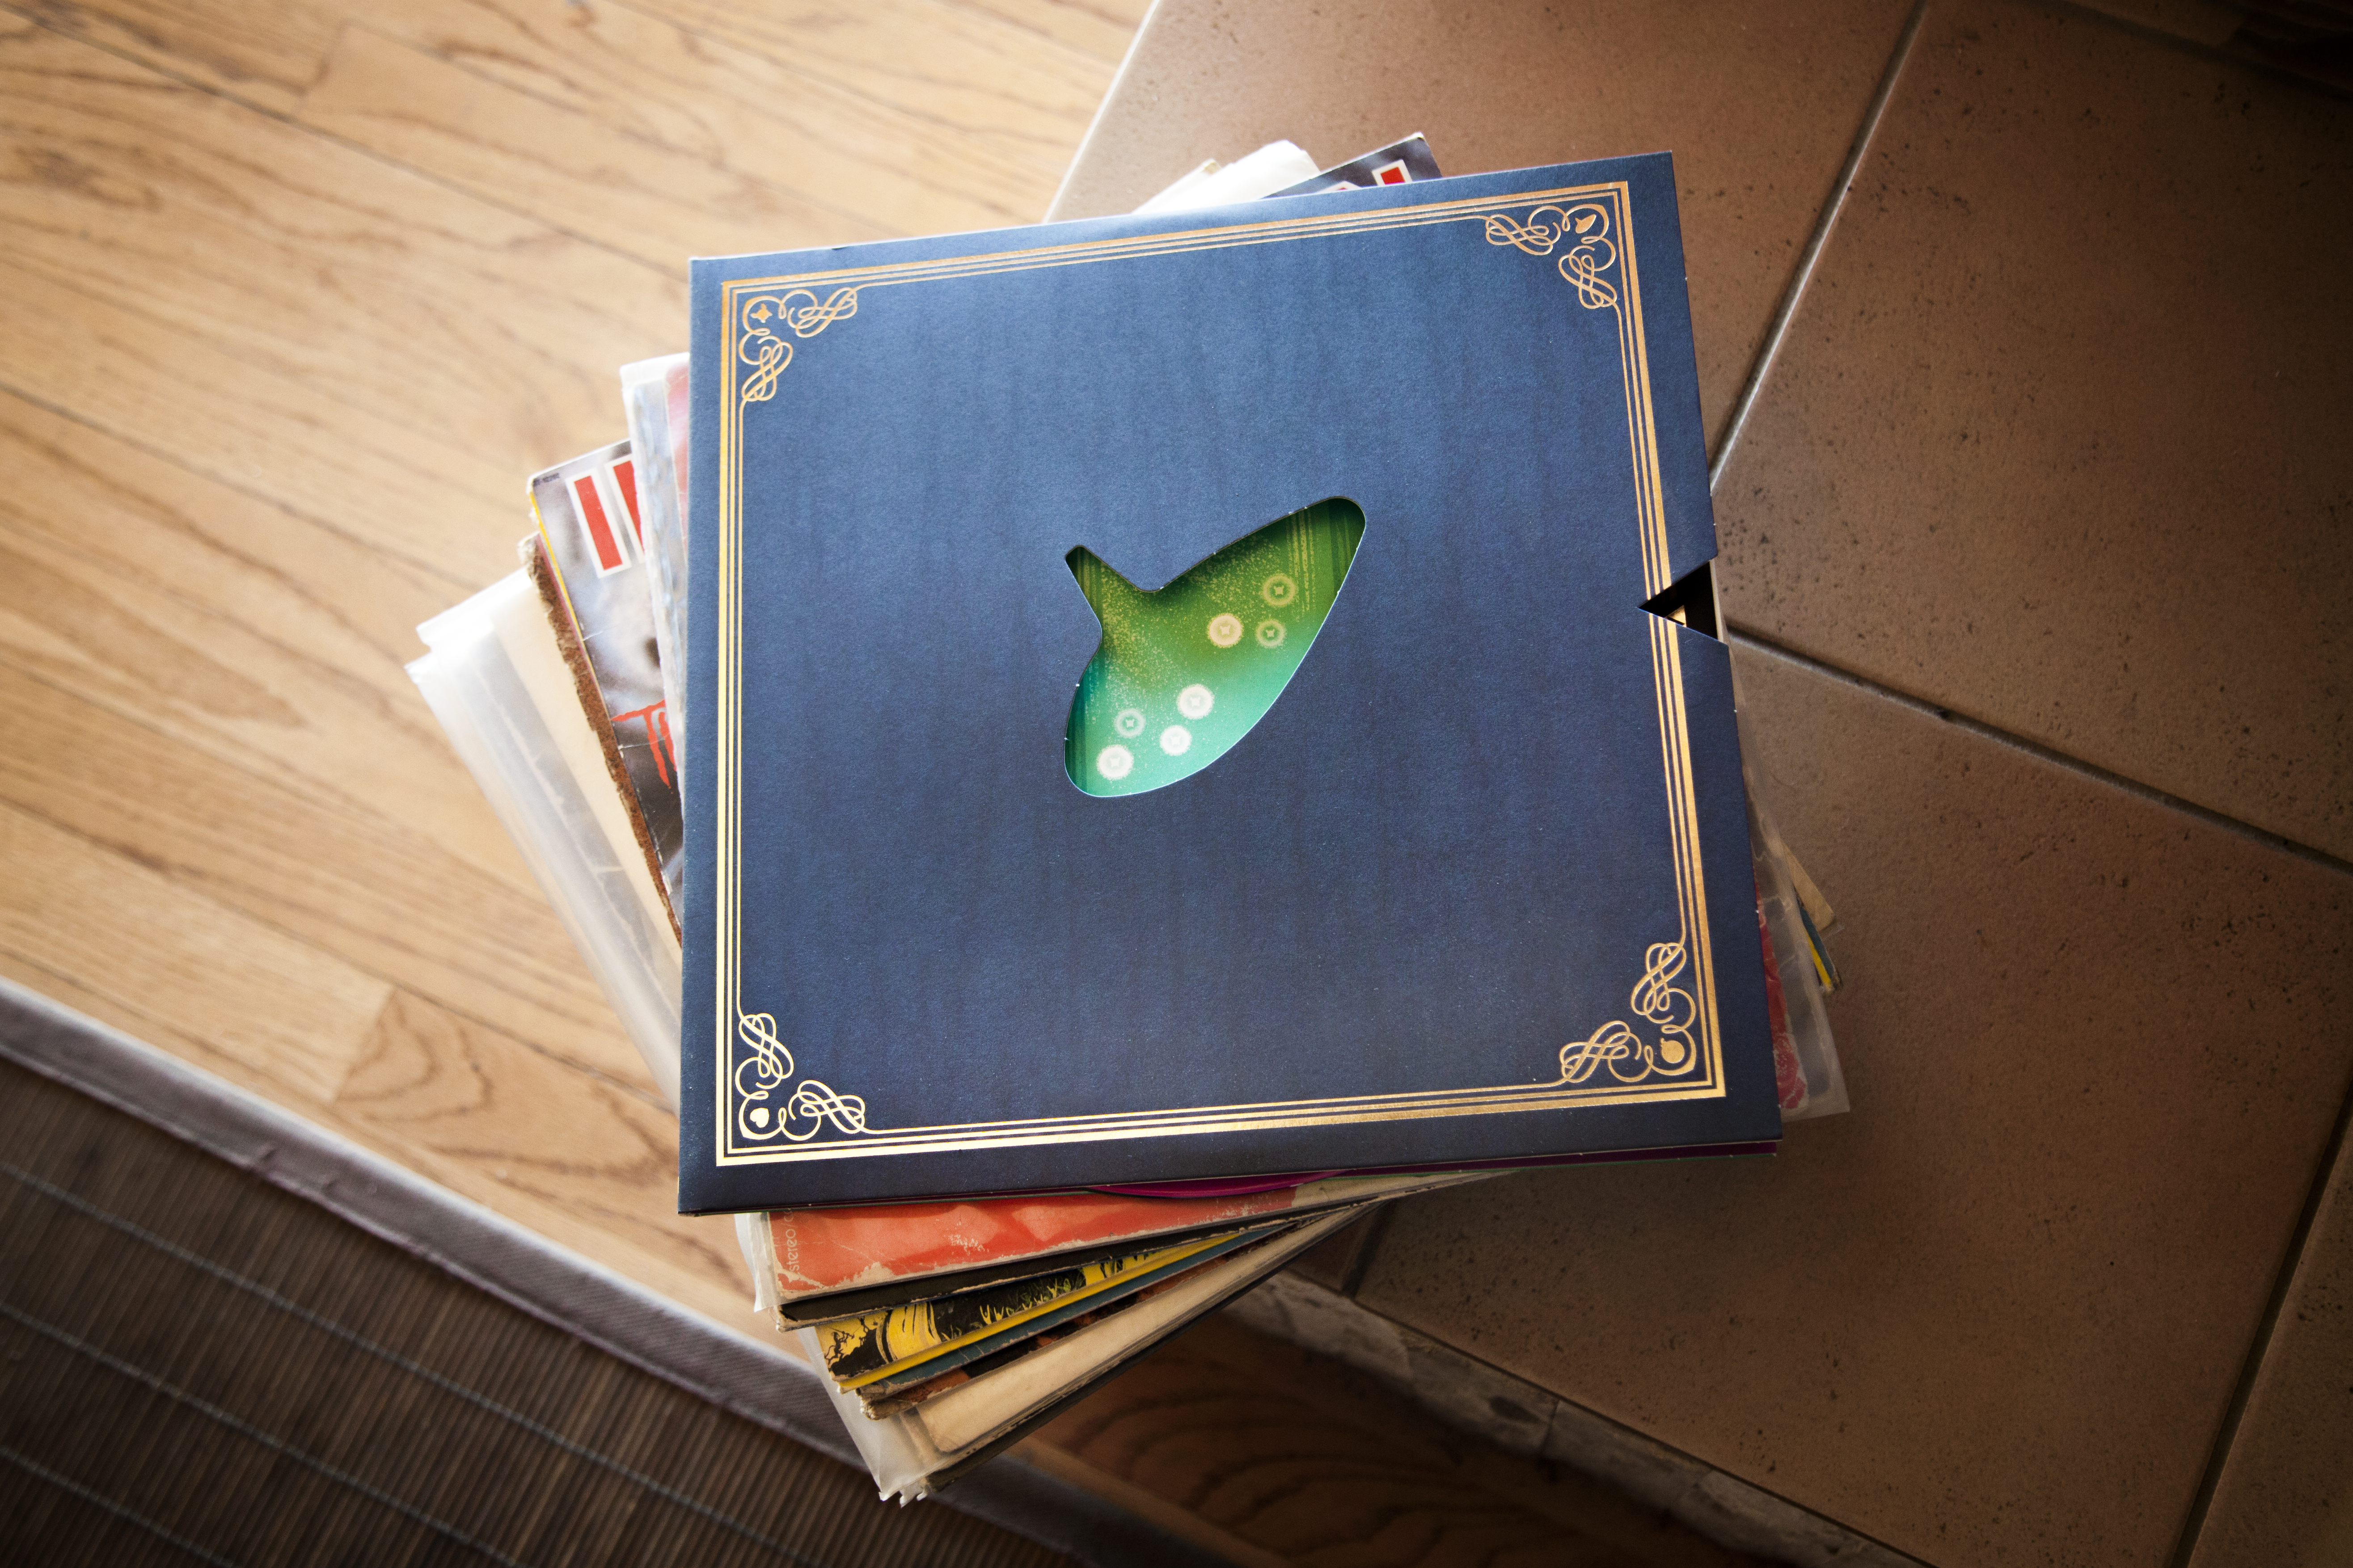 A vinyl for Koji Kondo’s Hero of Time atop a stack of other Zelda vinyl records